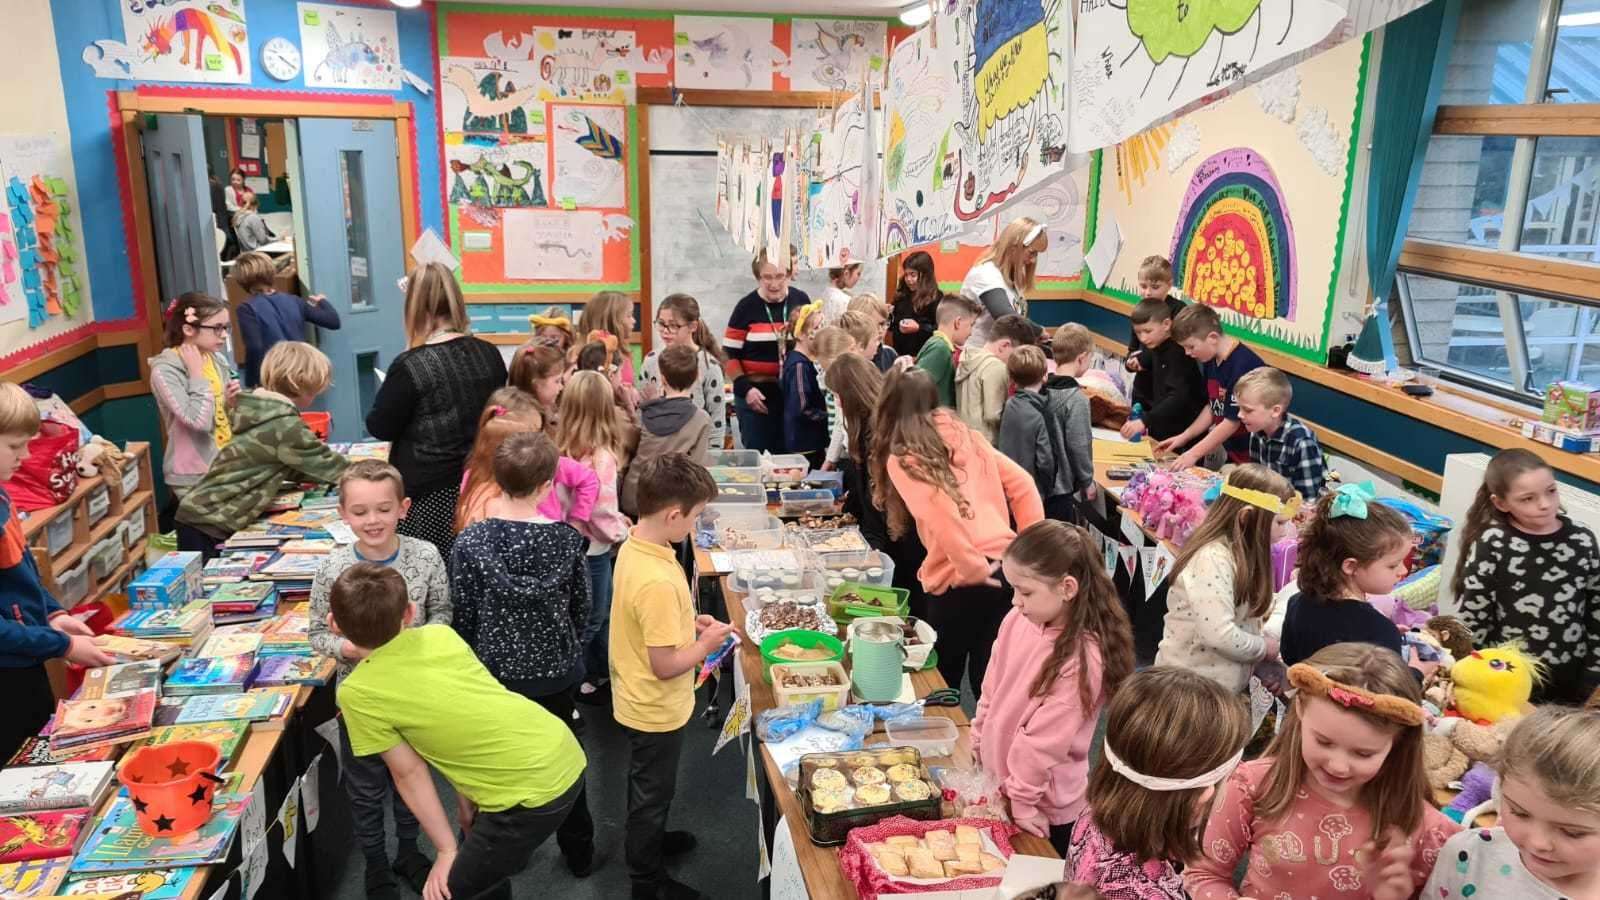 Auldearn Primary bakesale and fundraising activities for Children in Need.